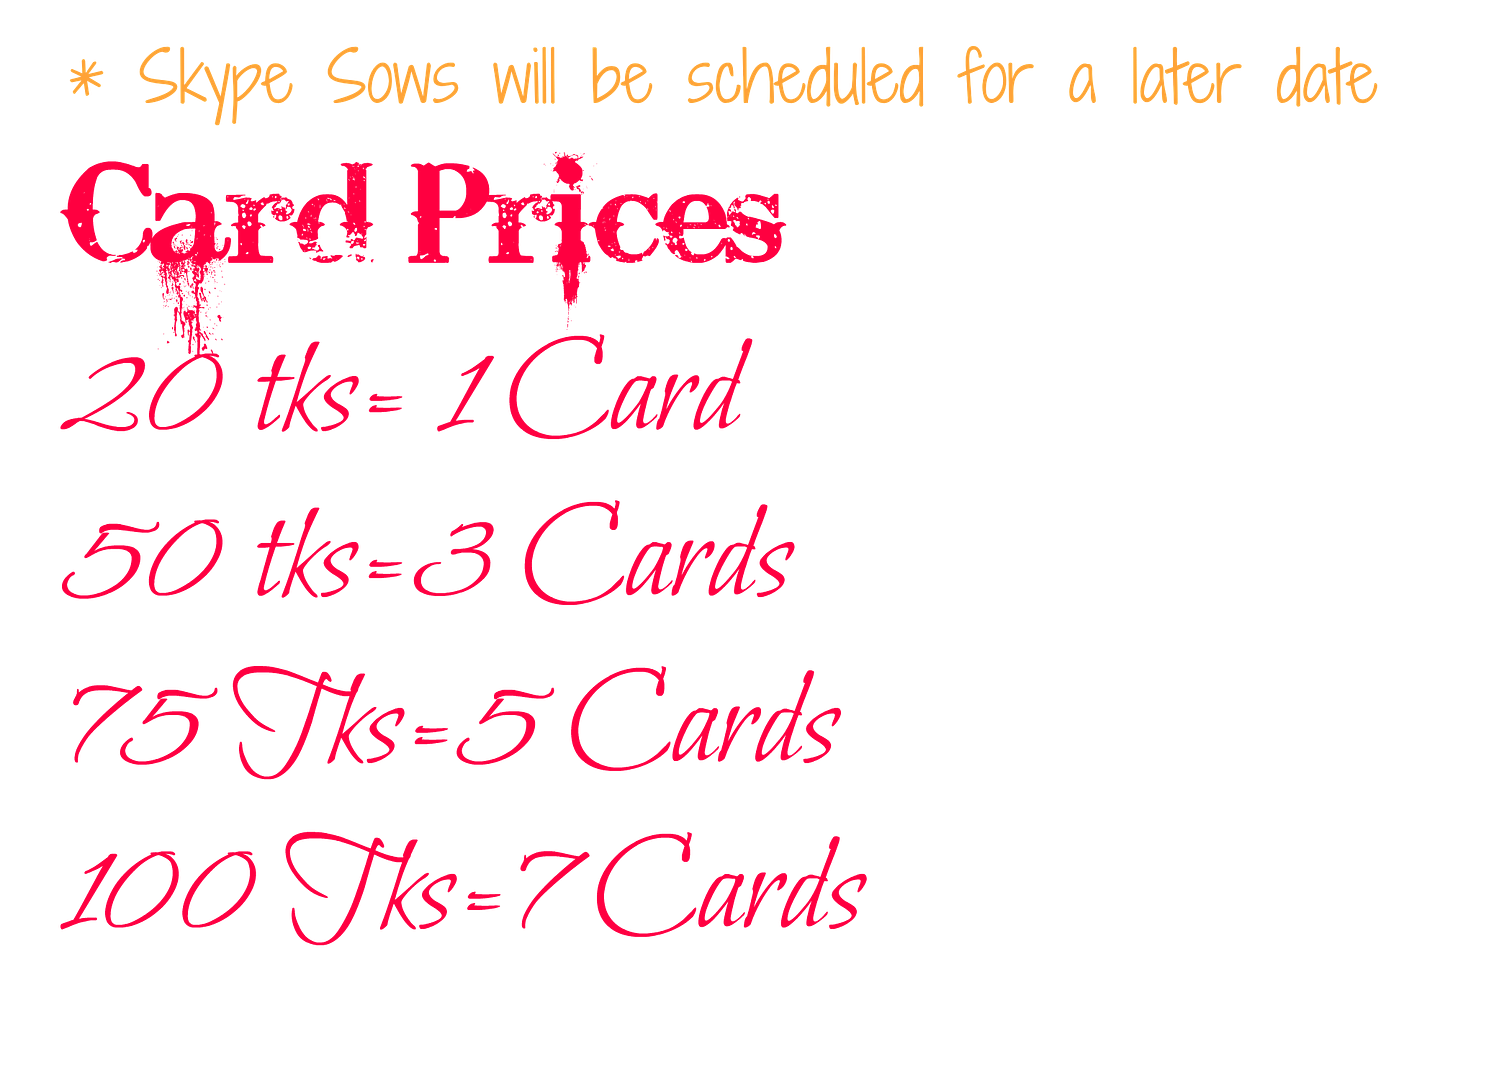 photo Card.prices.mfc_zpsson8o7d2.png